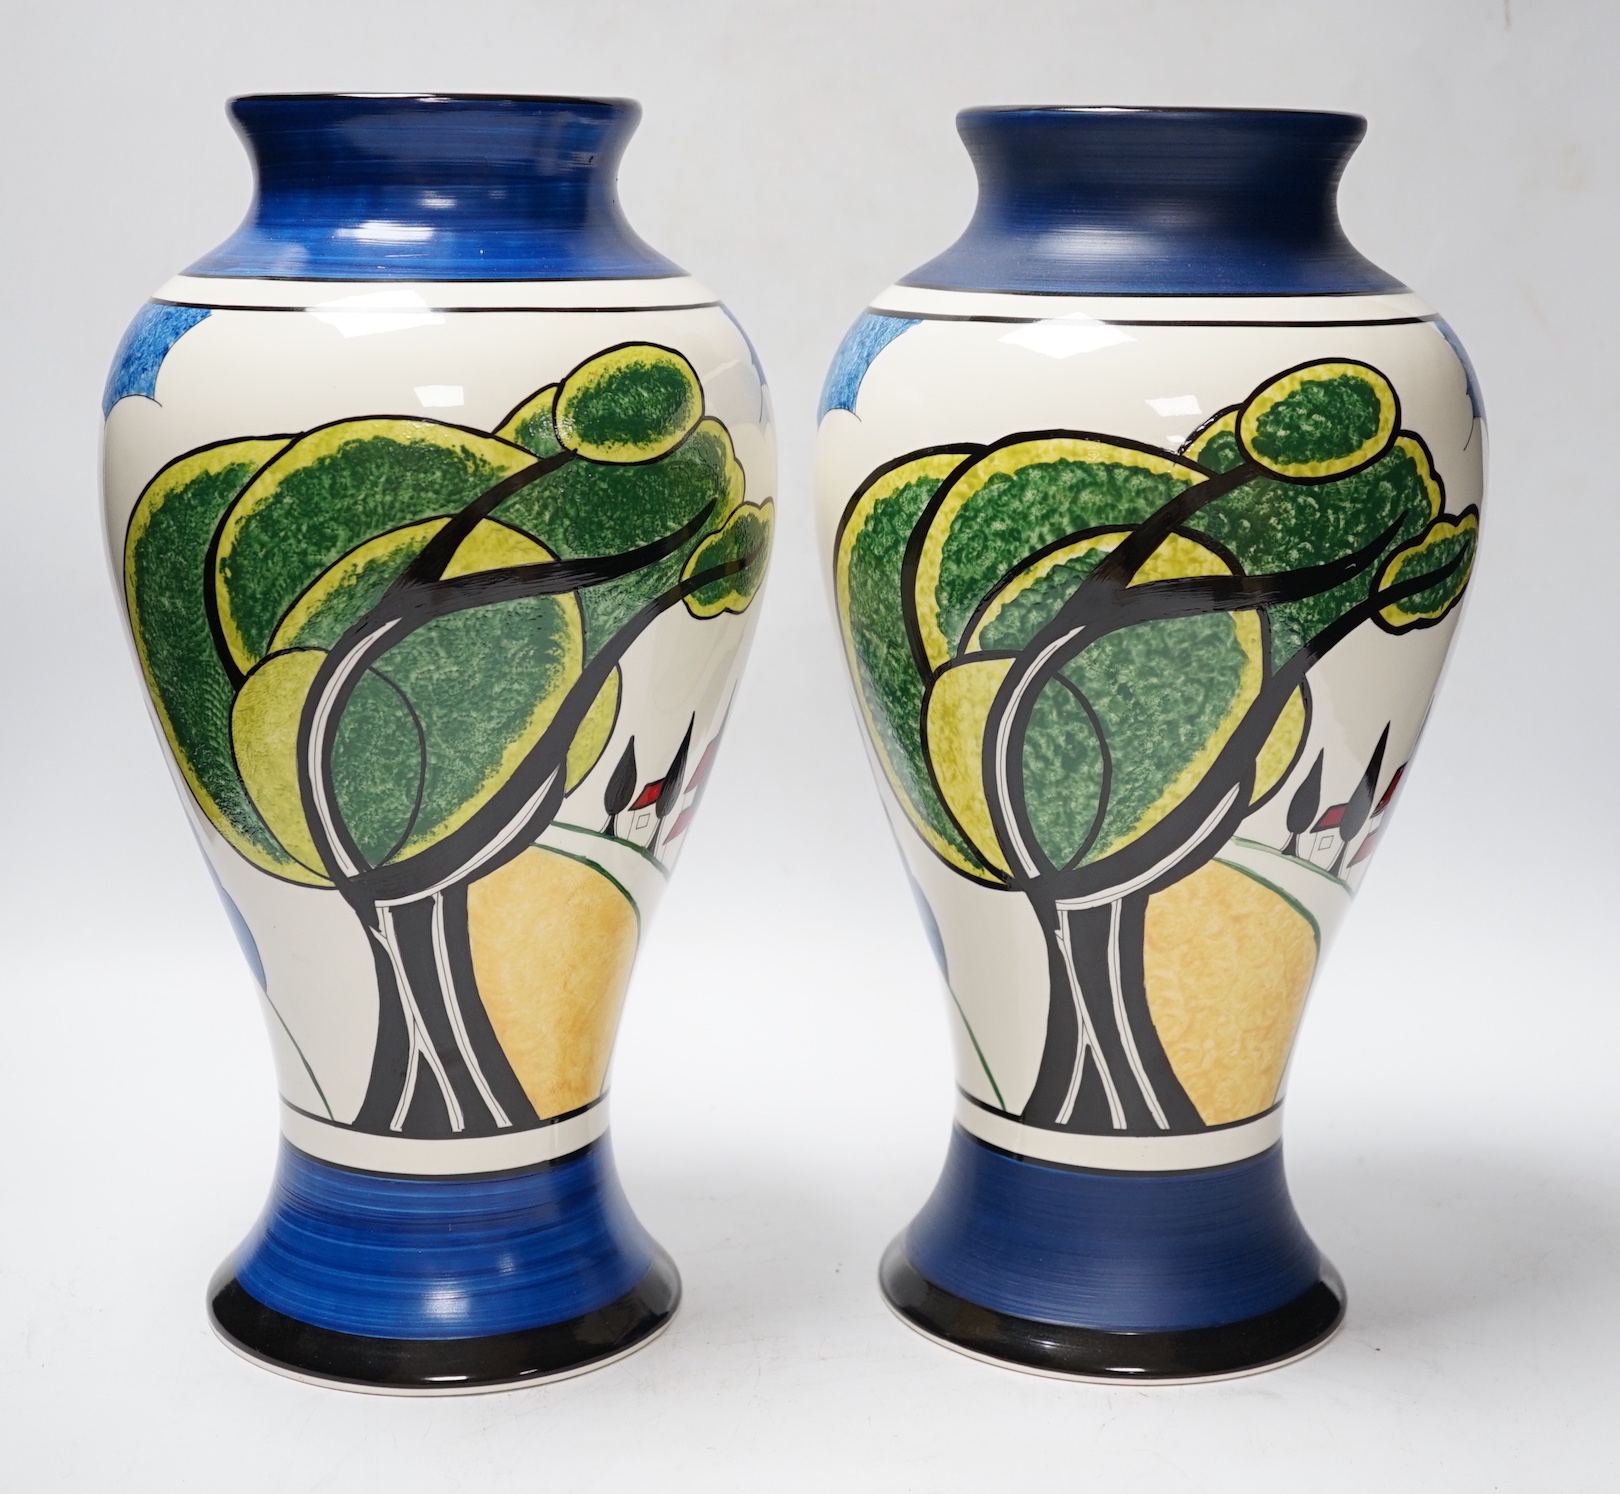 Two Wedgwood Clarice Cliff limited edition May Avenue Meiping vases, each with boxes and certificates, 30cm high